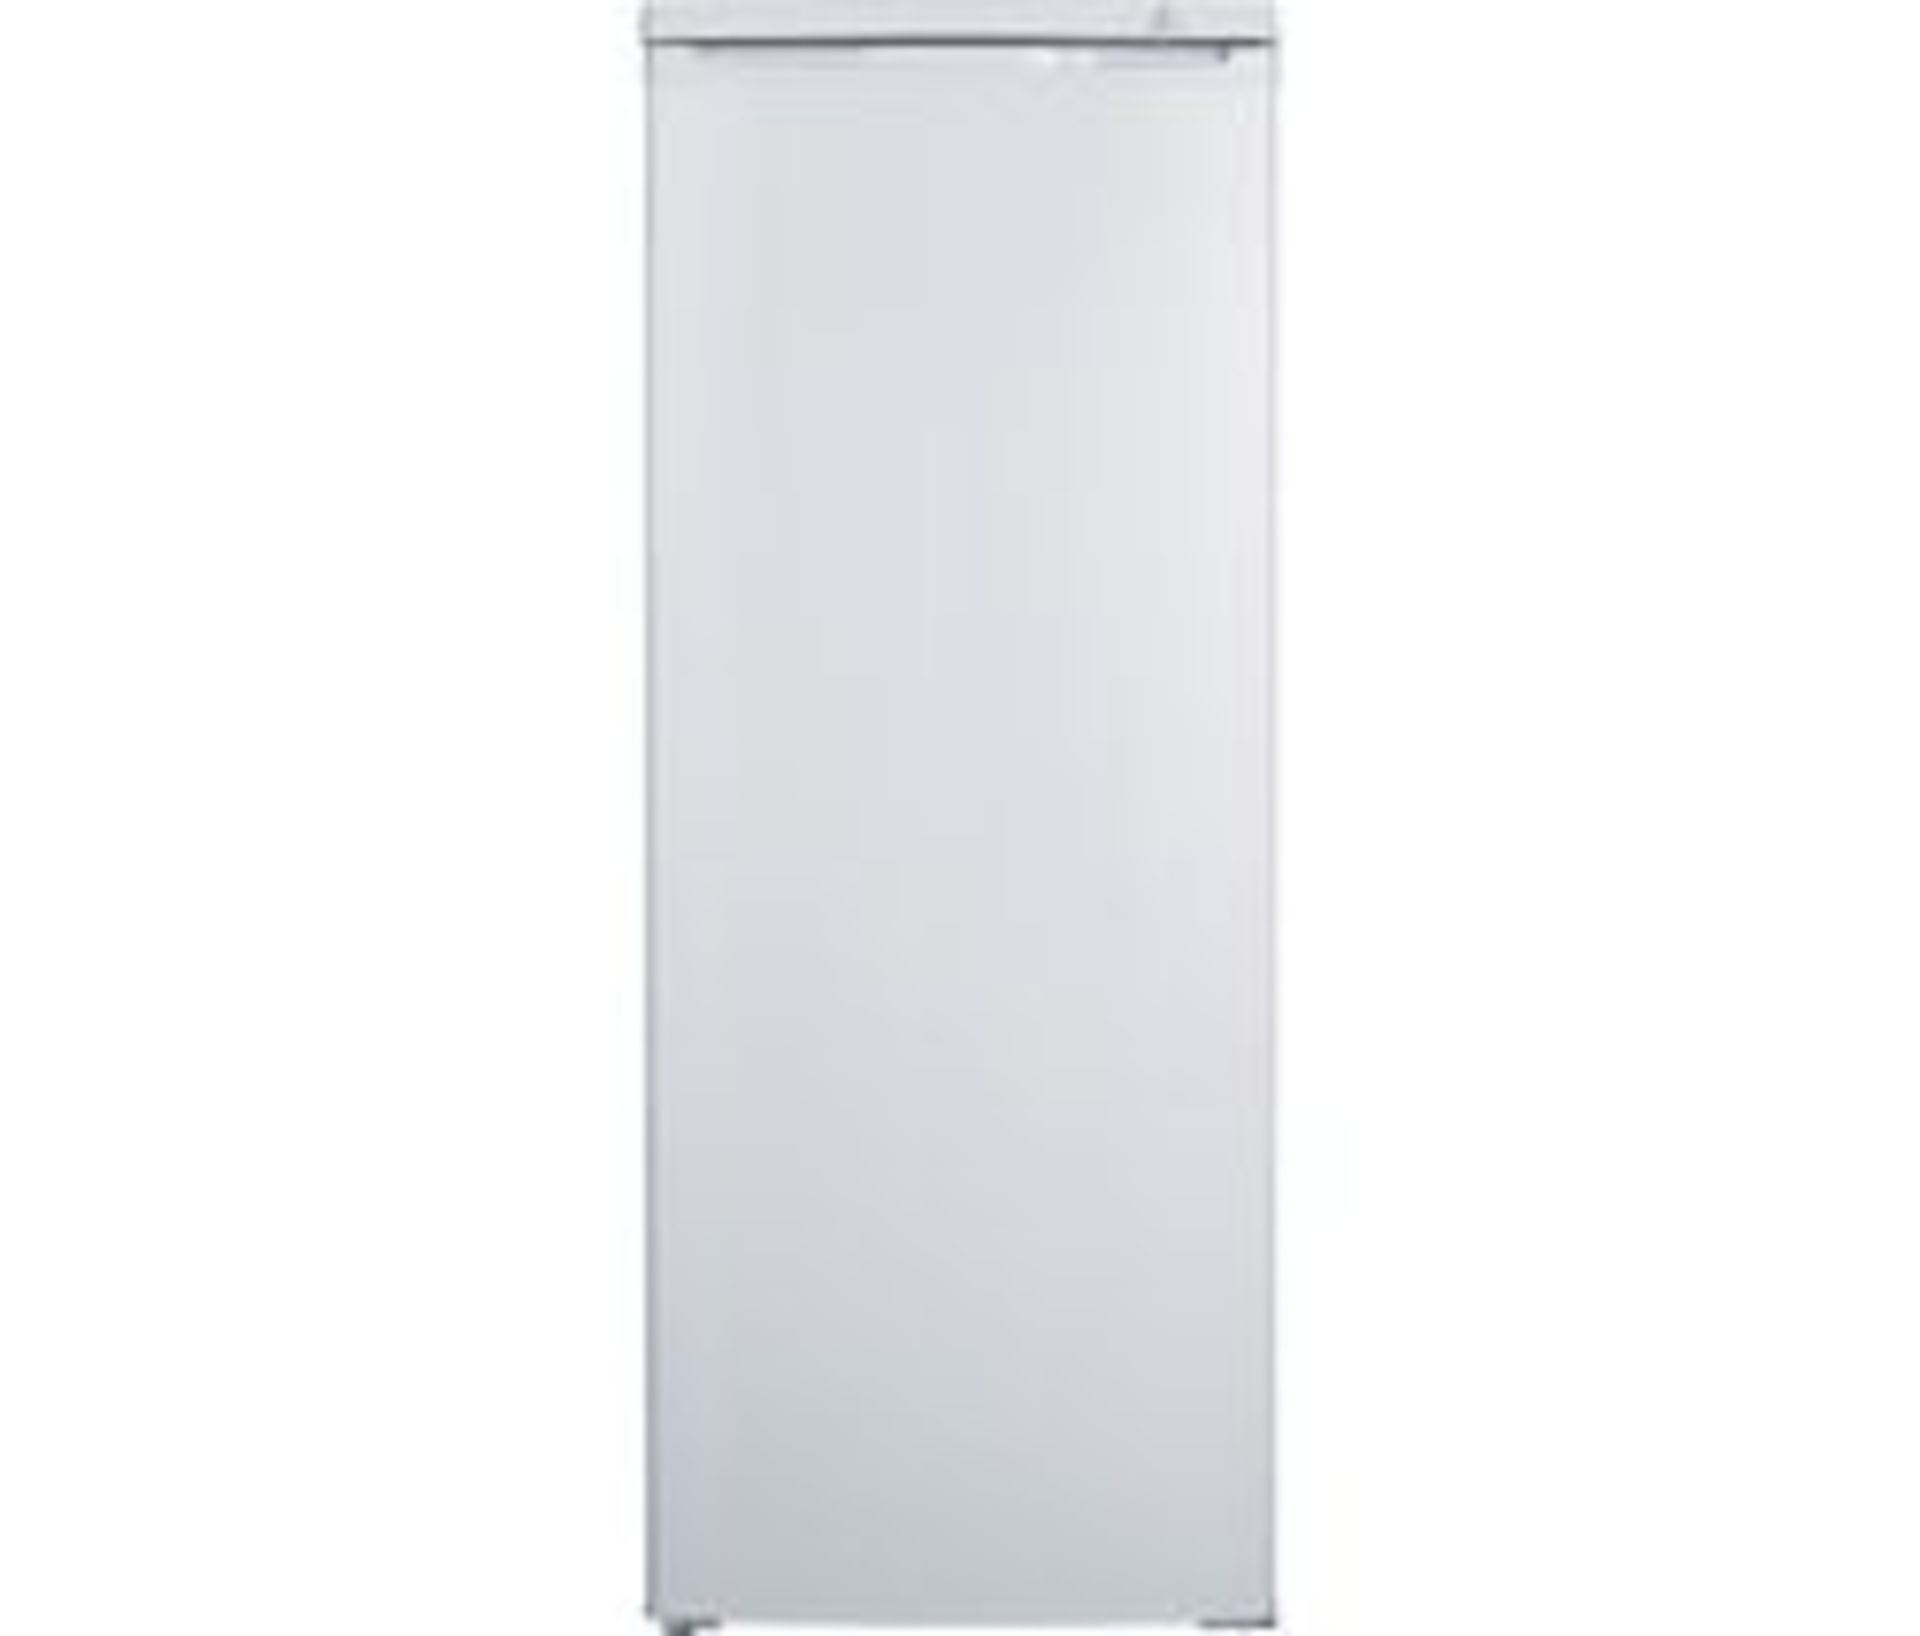 Pallet of mixed Fridges and Freezers, brands include Kenwood, Logik. Latest selling price £1,148.97 - Image 4 of 4